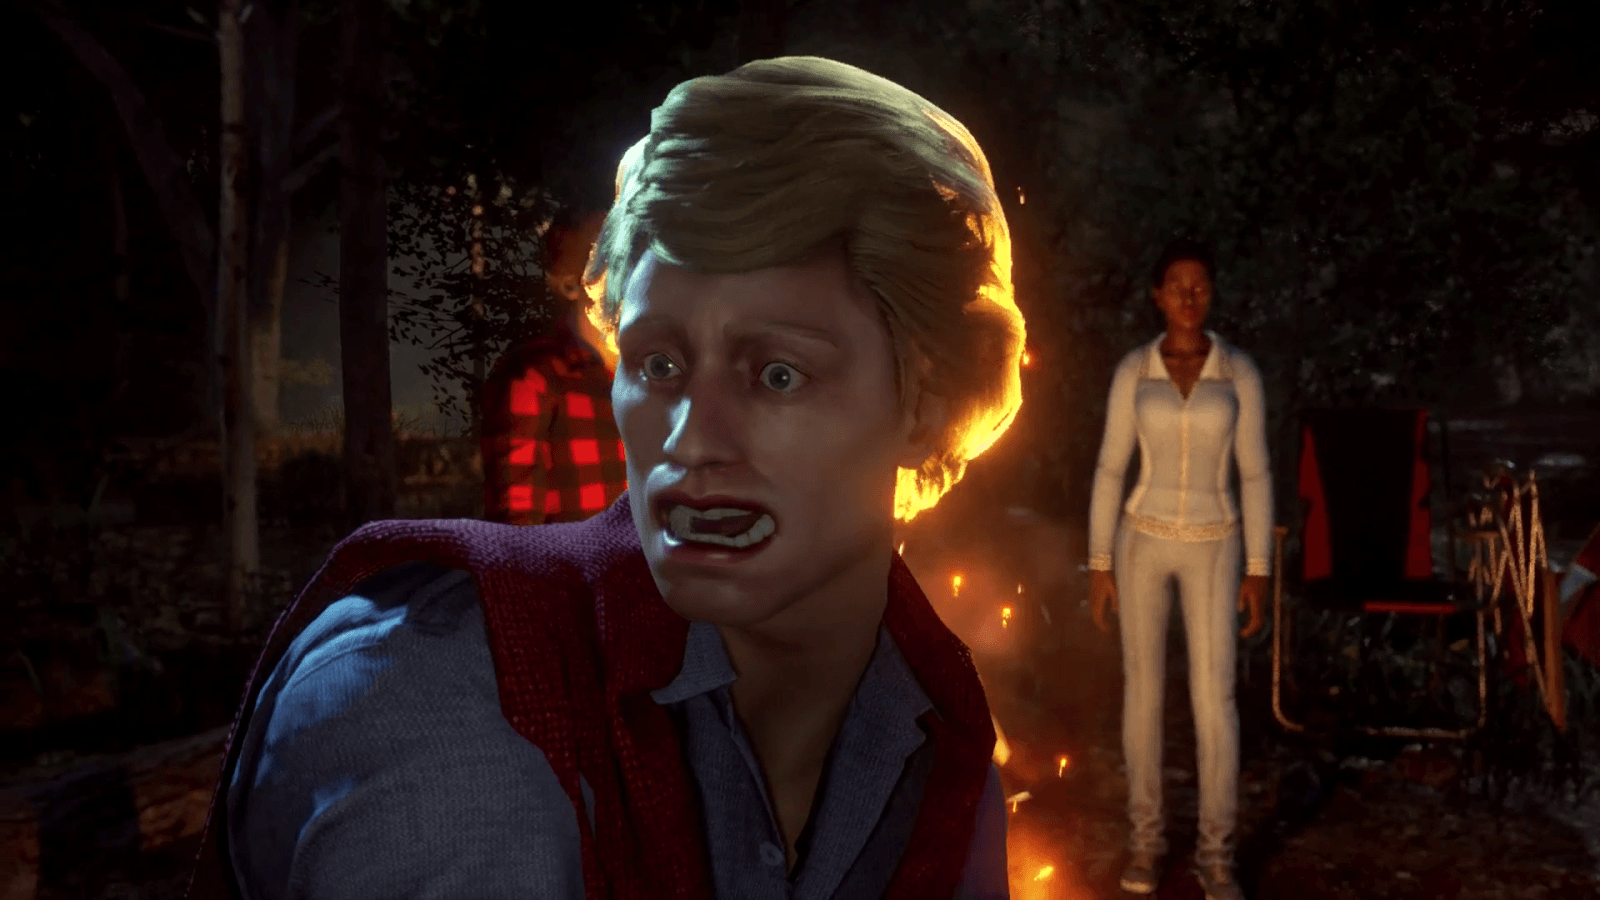 The Friday The 13th Game Isn't Very Good